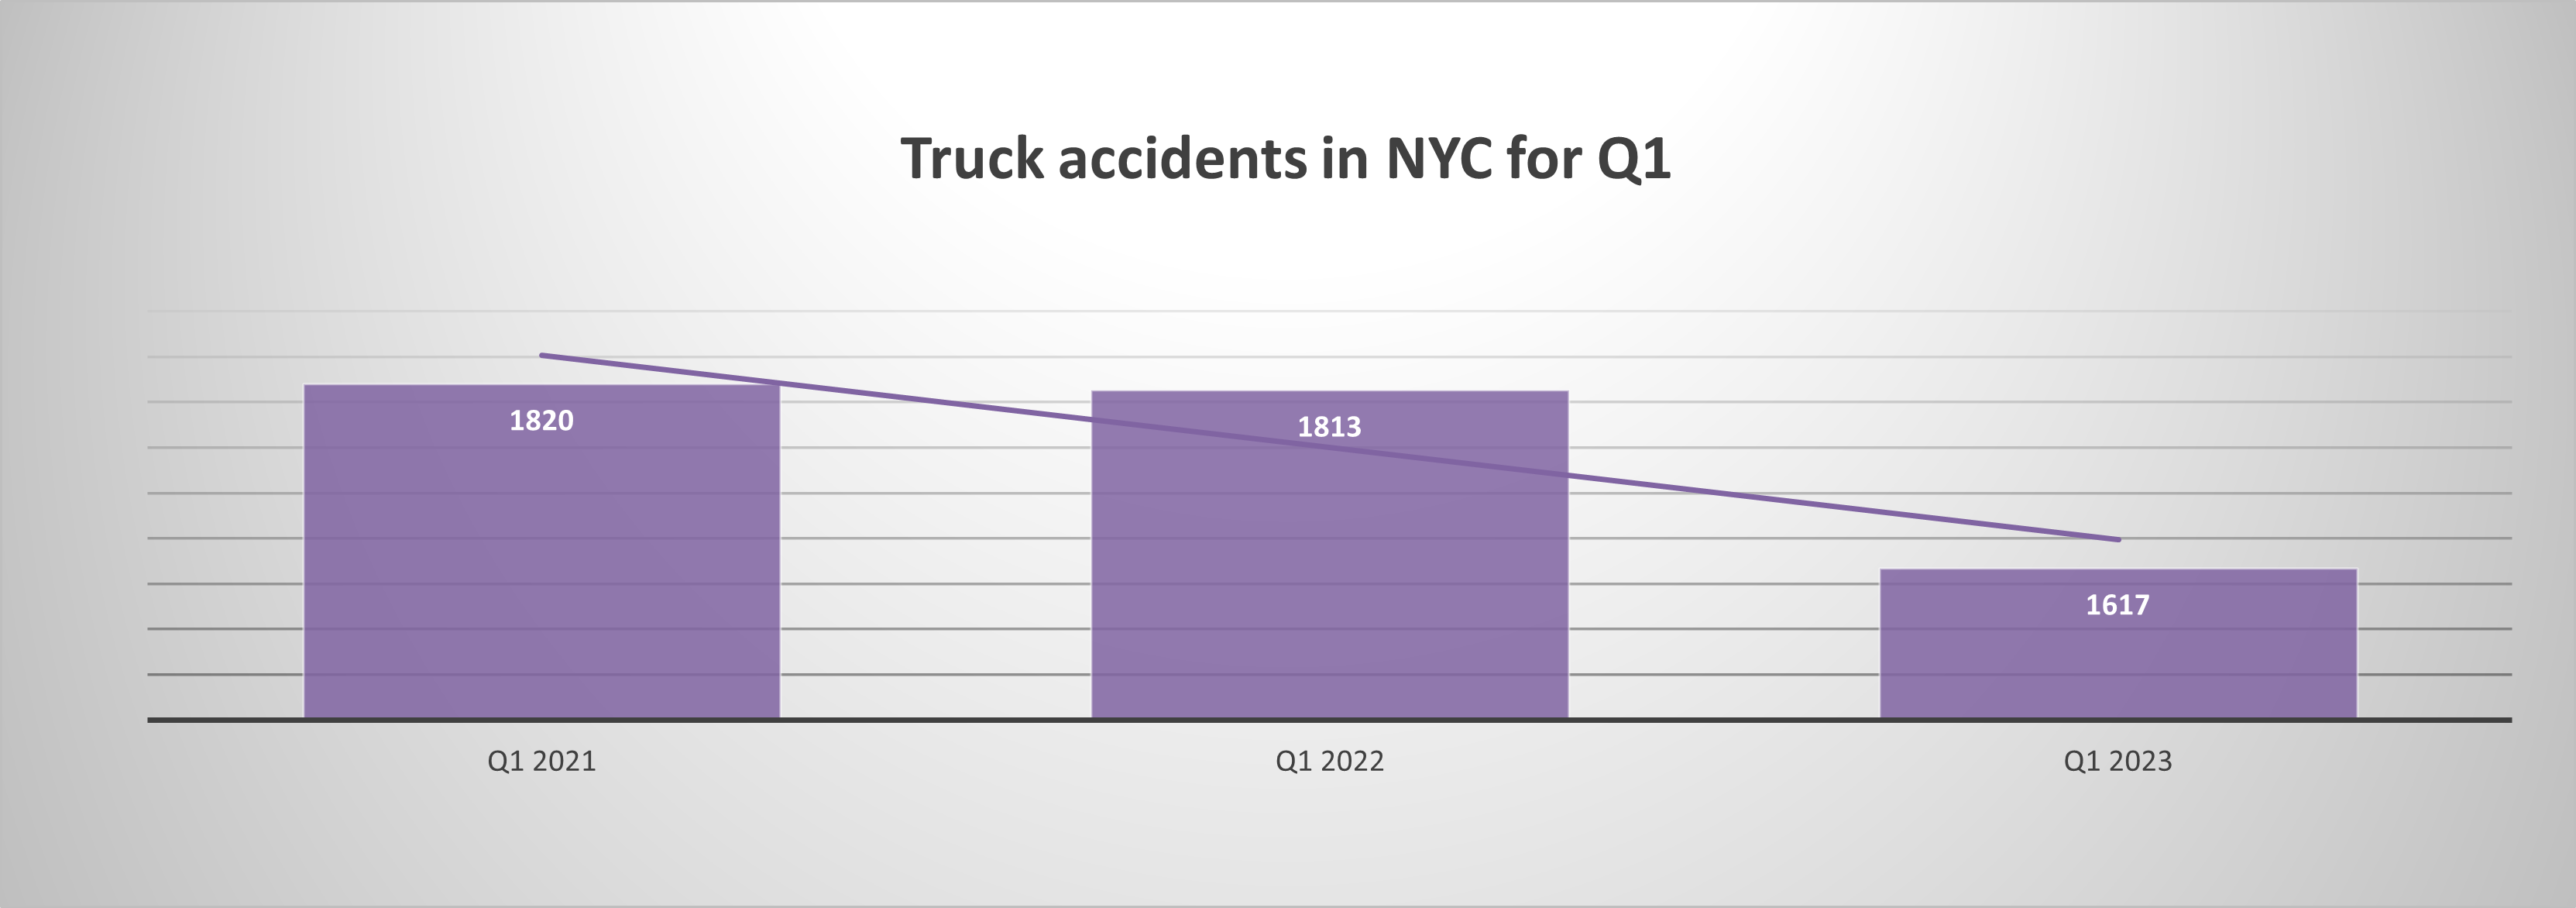 truck accidents in NYC Q1 2023